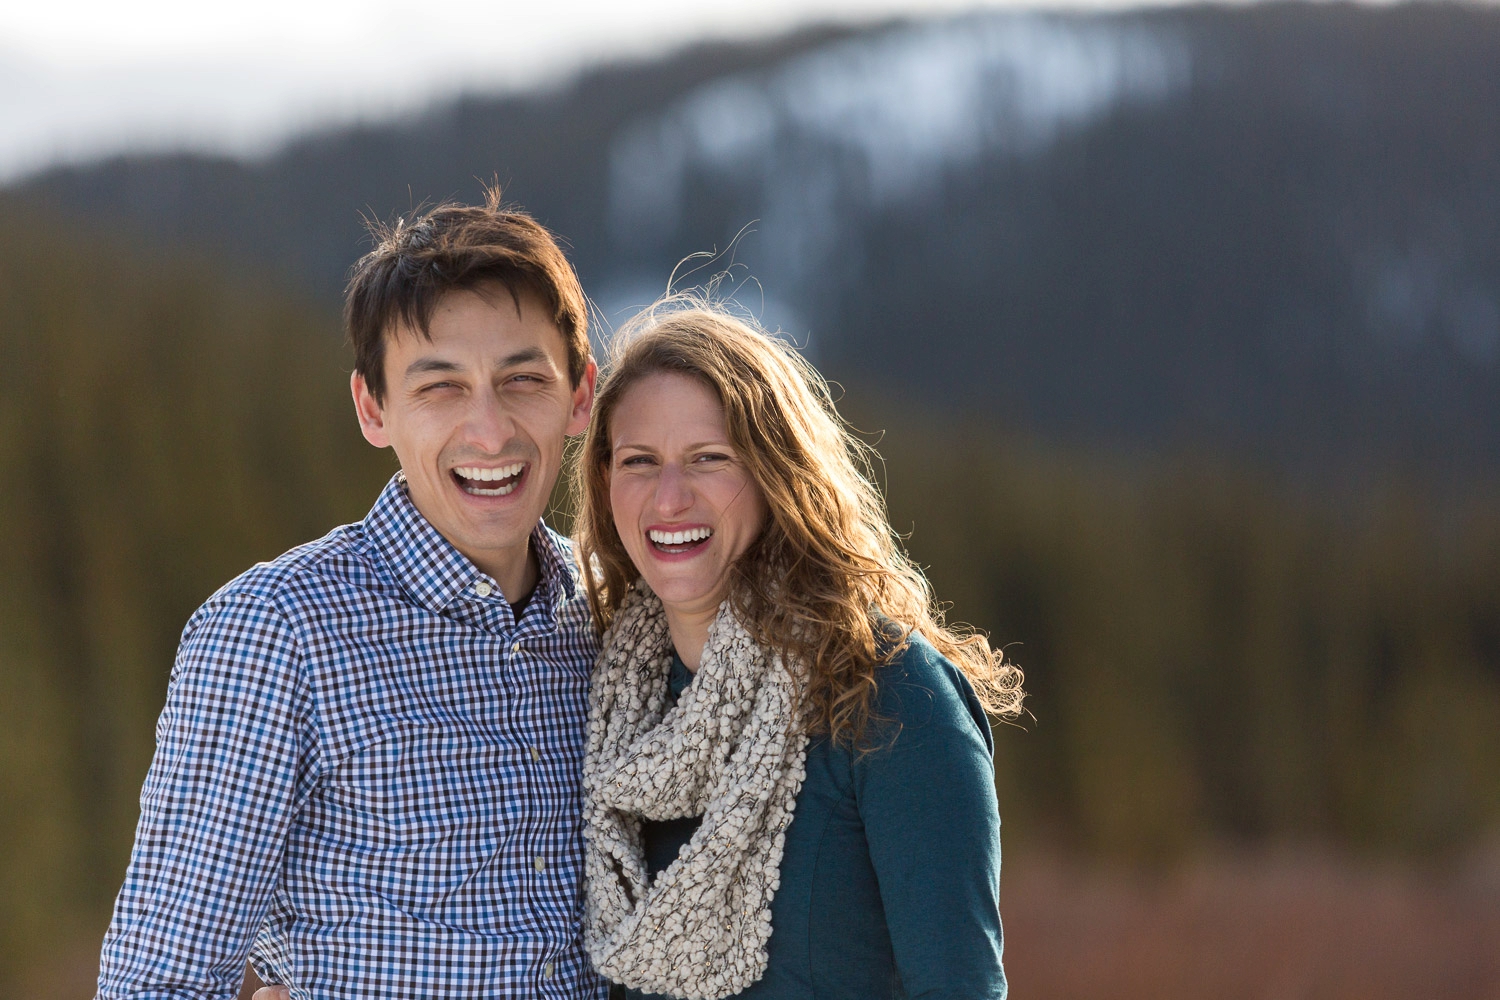 colorado mountain engagement in snow